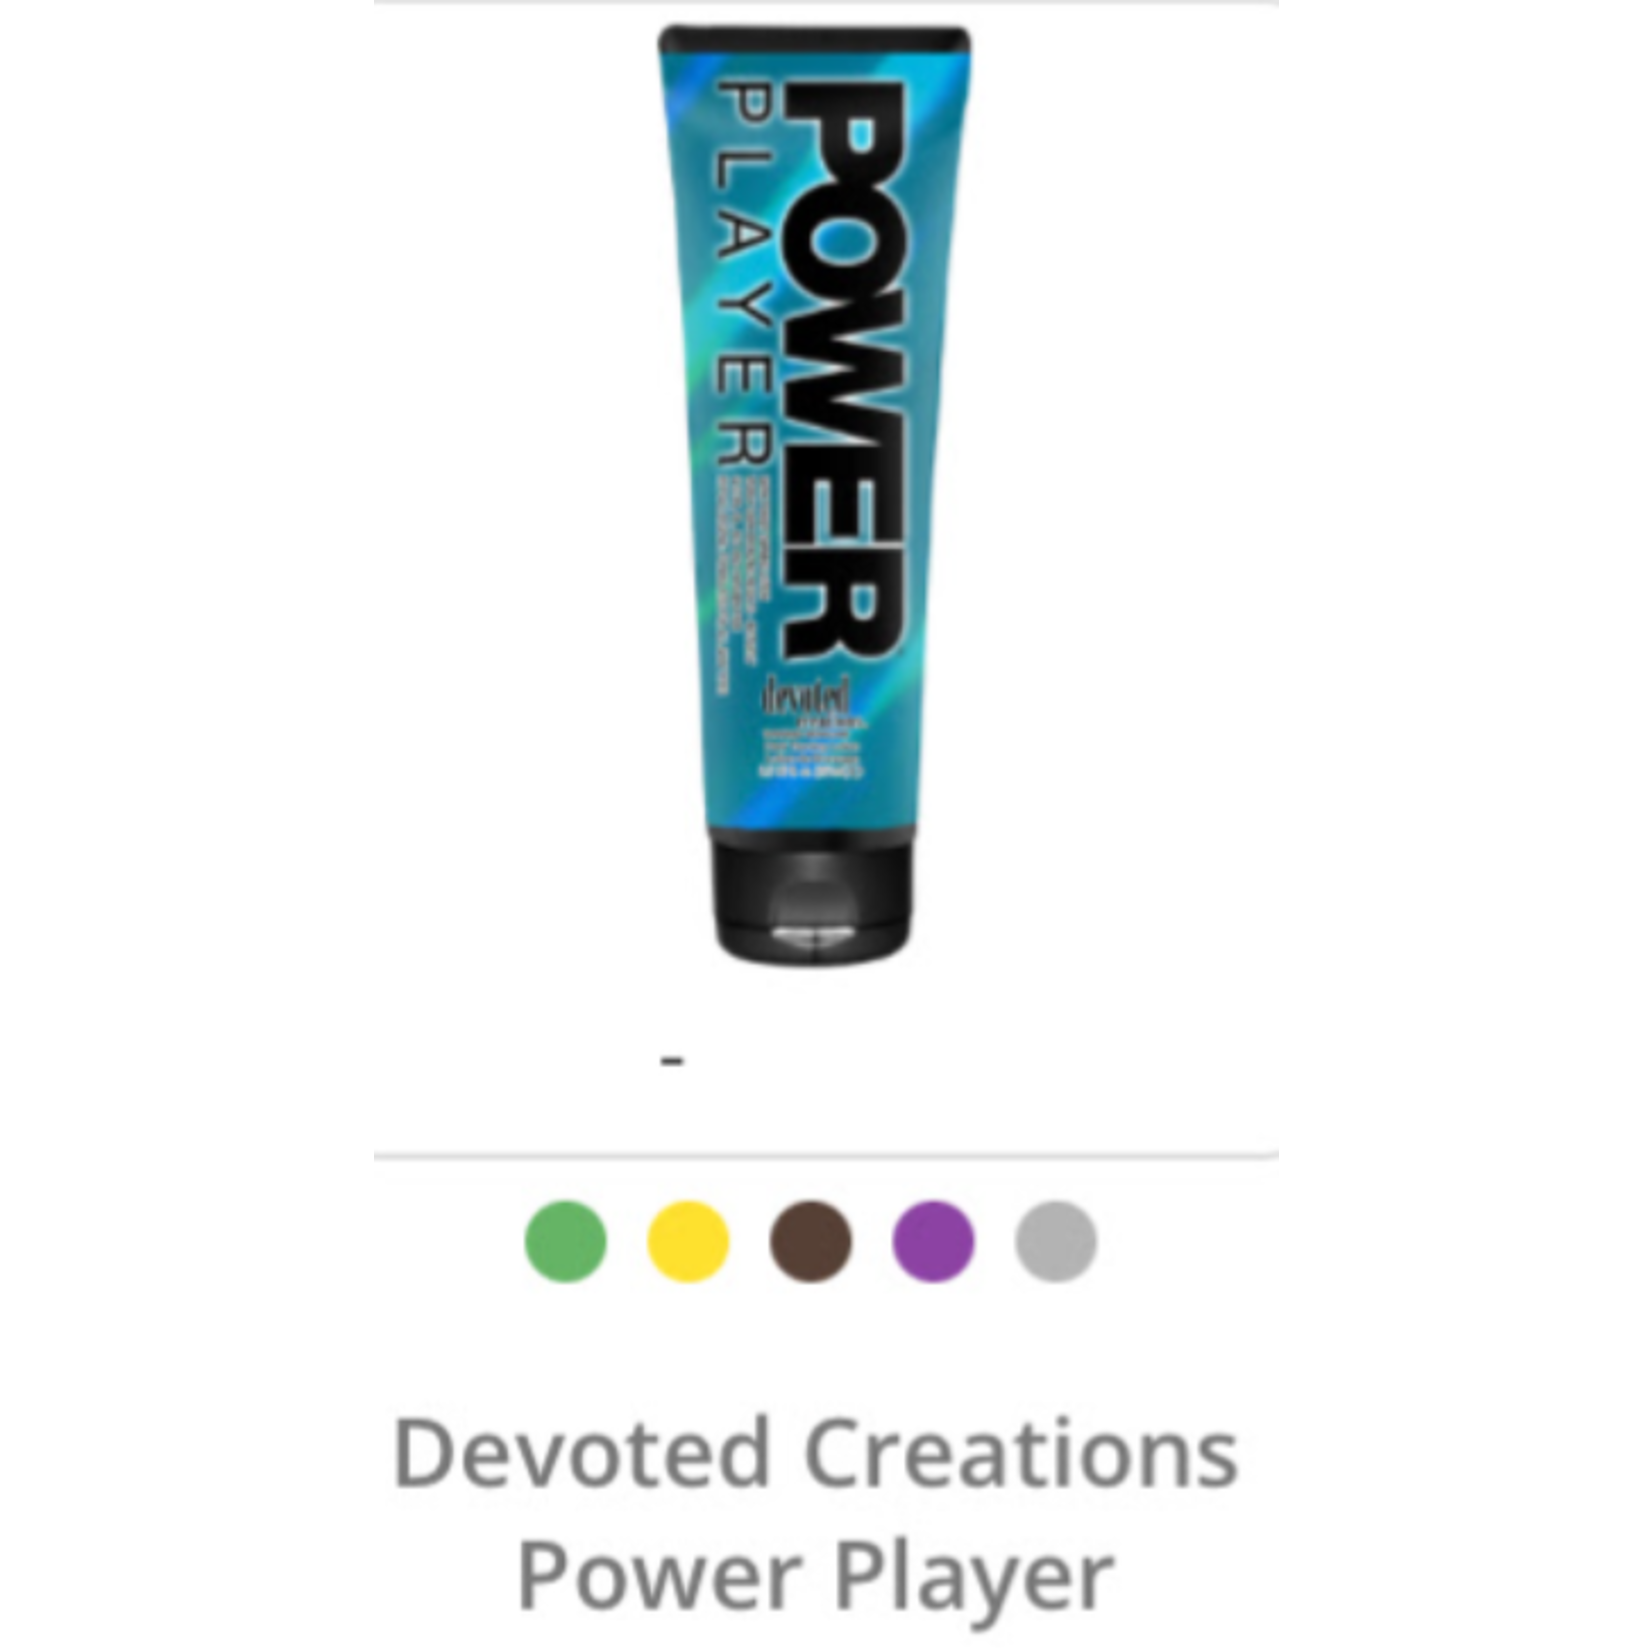 DEVOTED CREATIONS POWER PLAYER